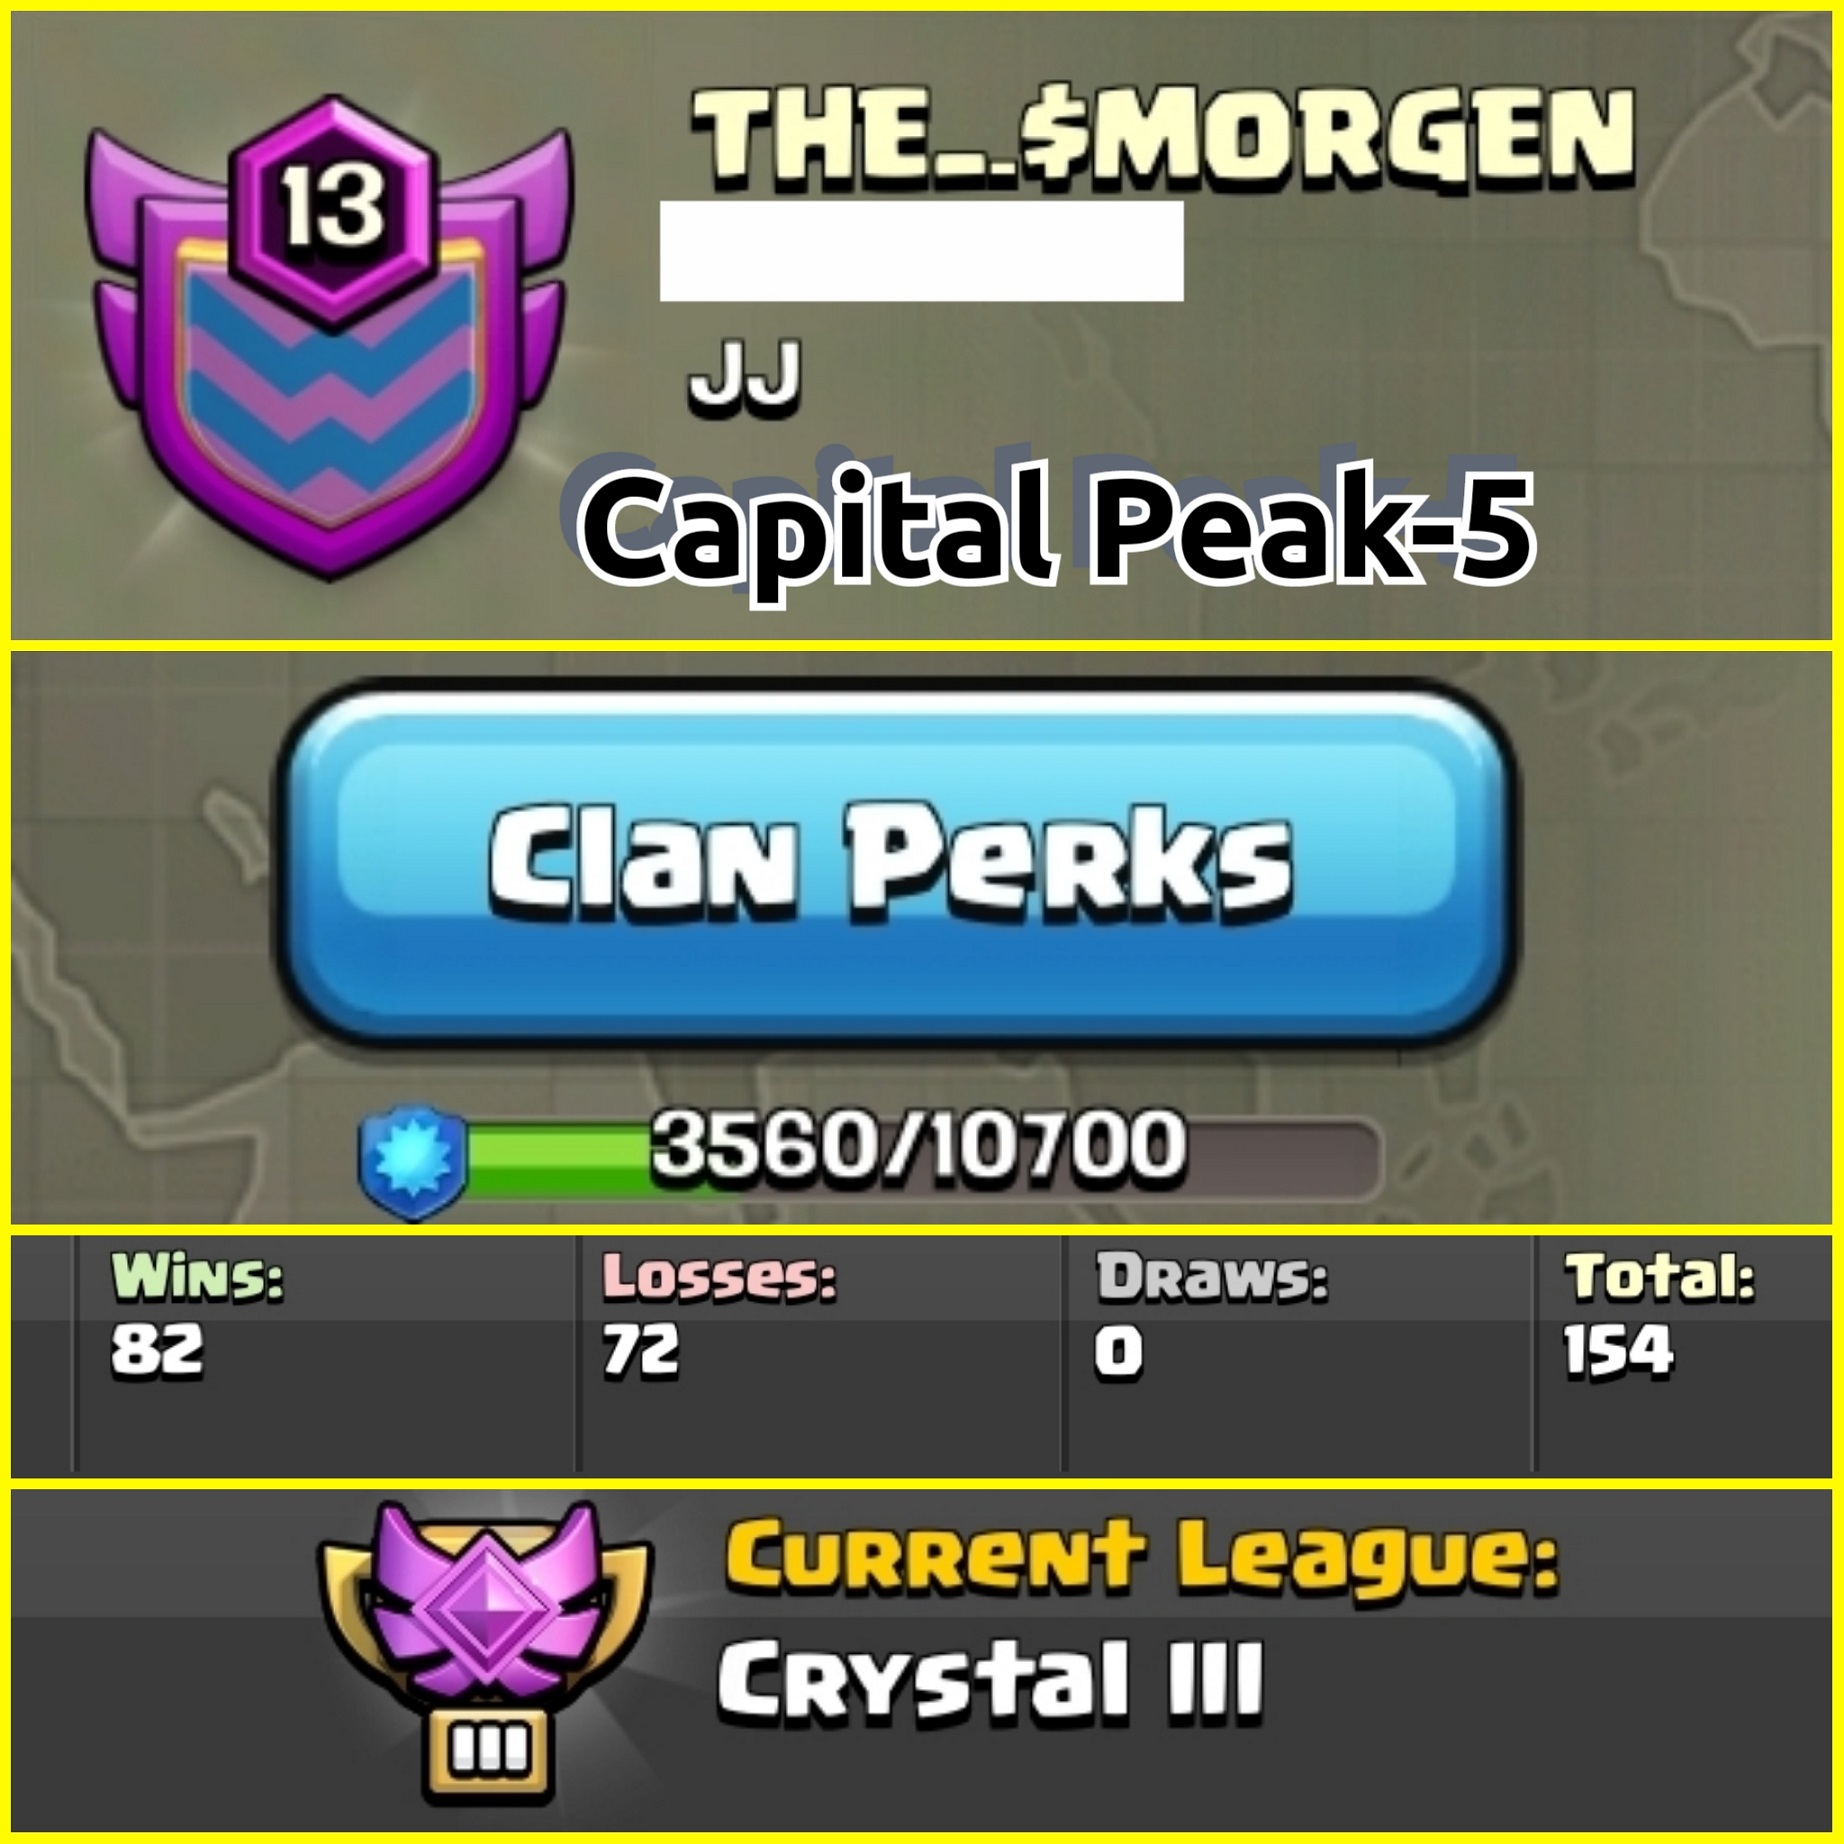 || Level - 13 || Name - THE_-$MORGEN || Crystal League 3 || Capital Peak 5 || Both Android and iOS || Fast Delivery ||